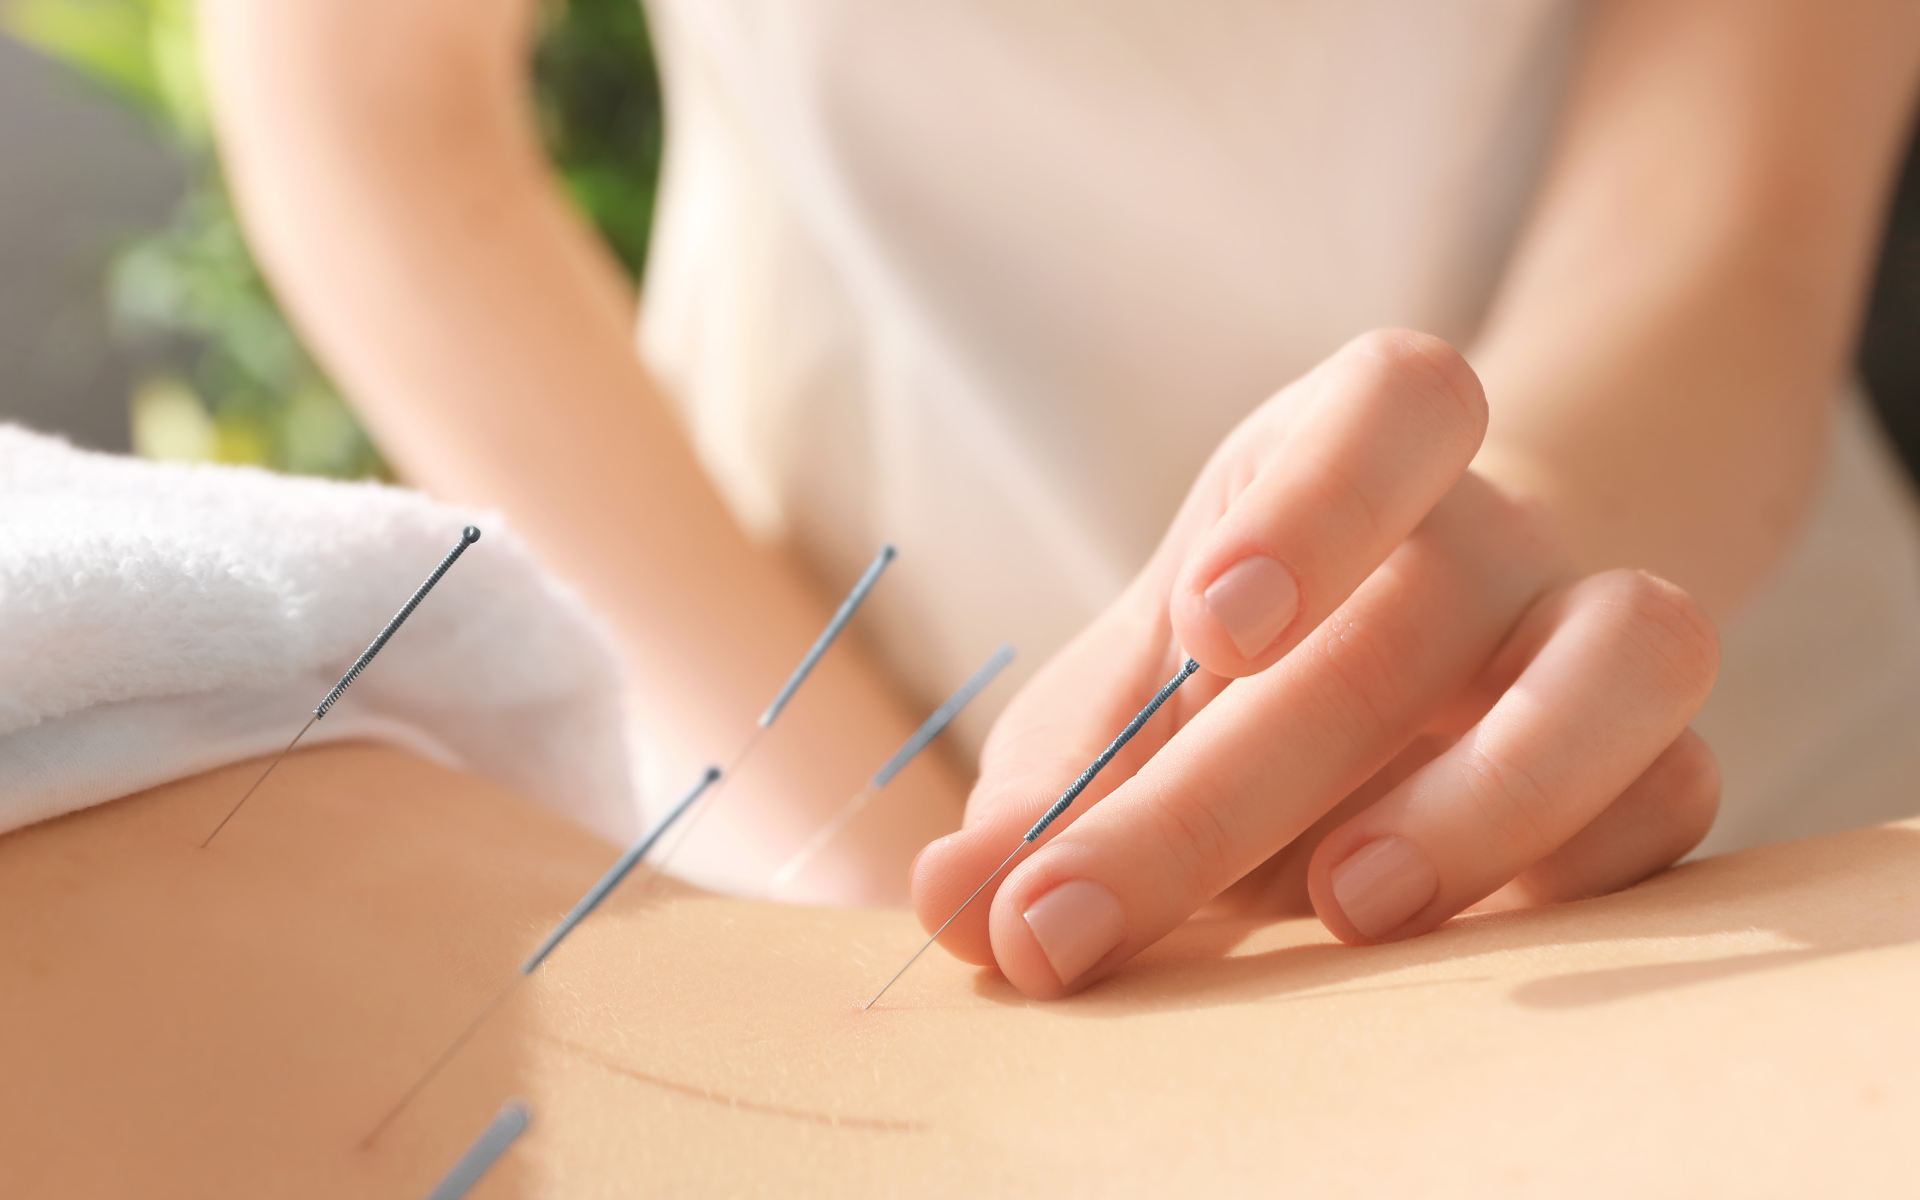 Introduction to acupuncture